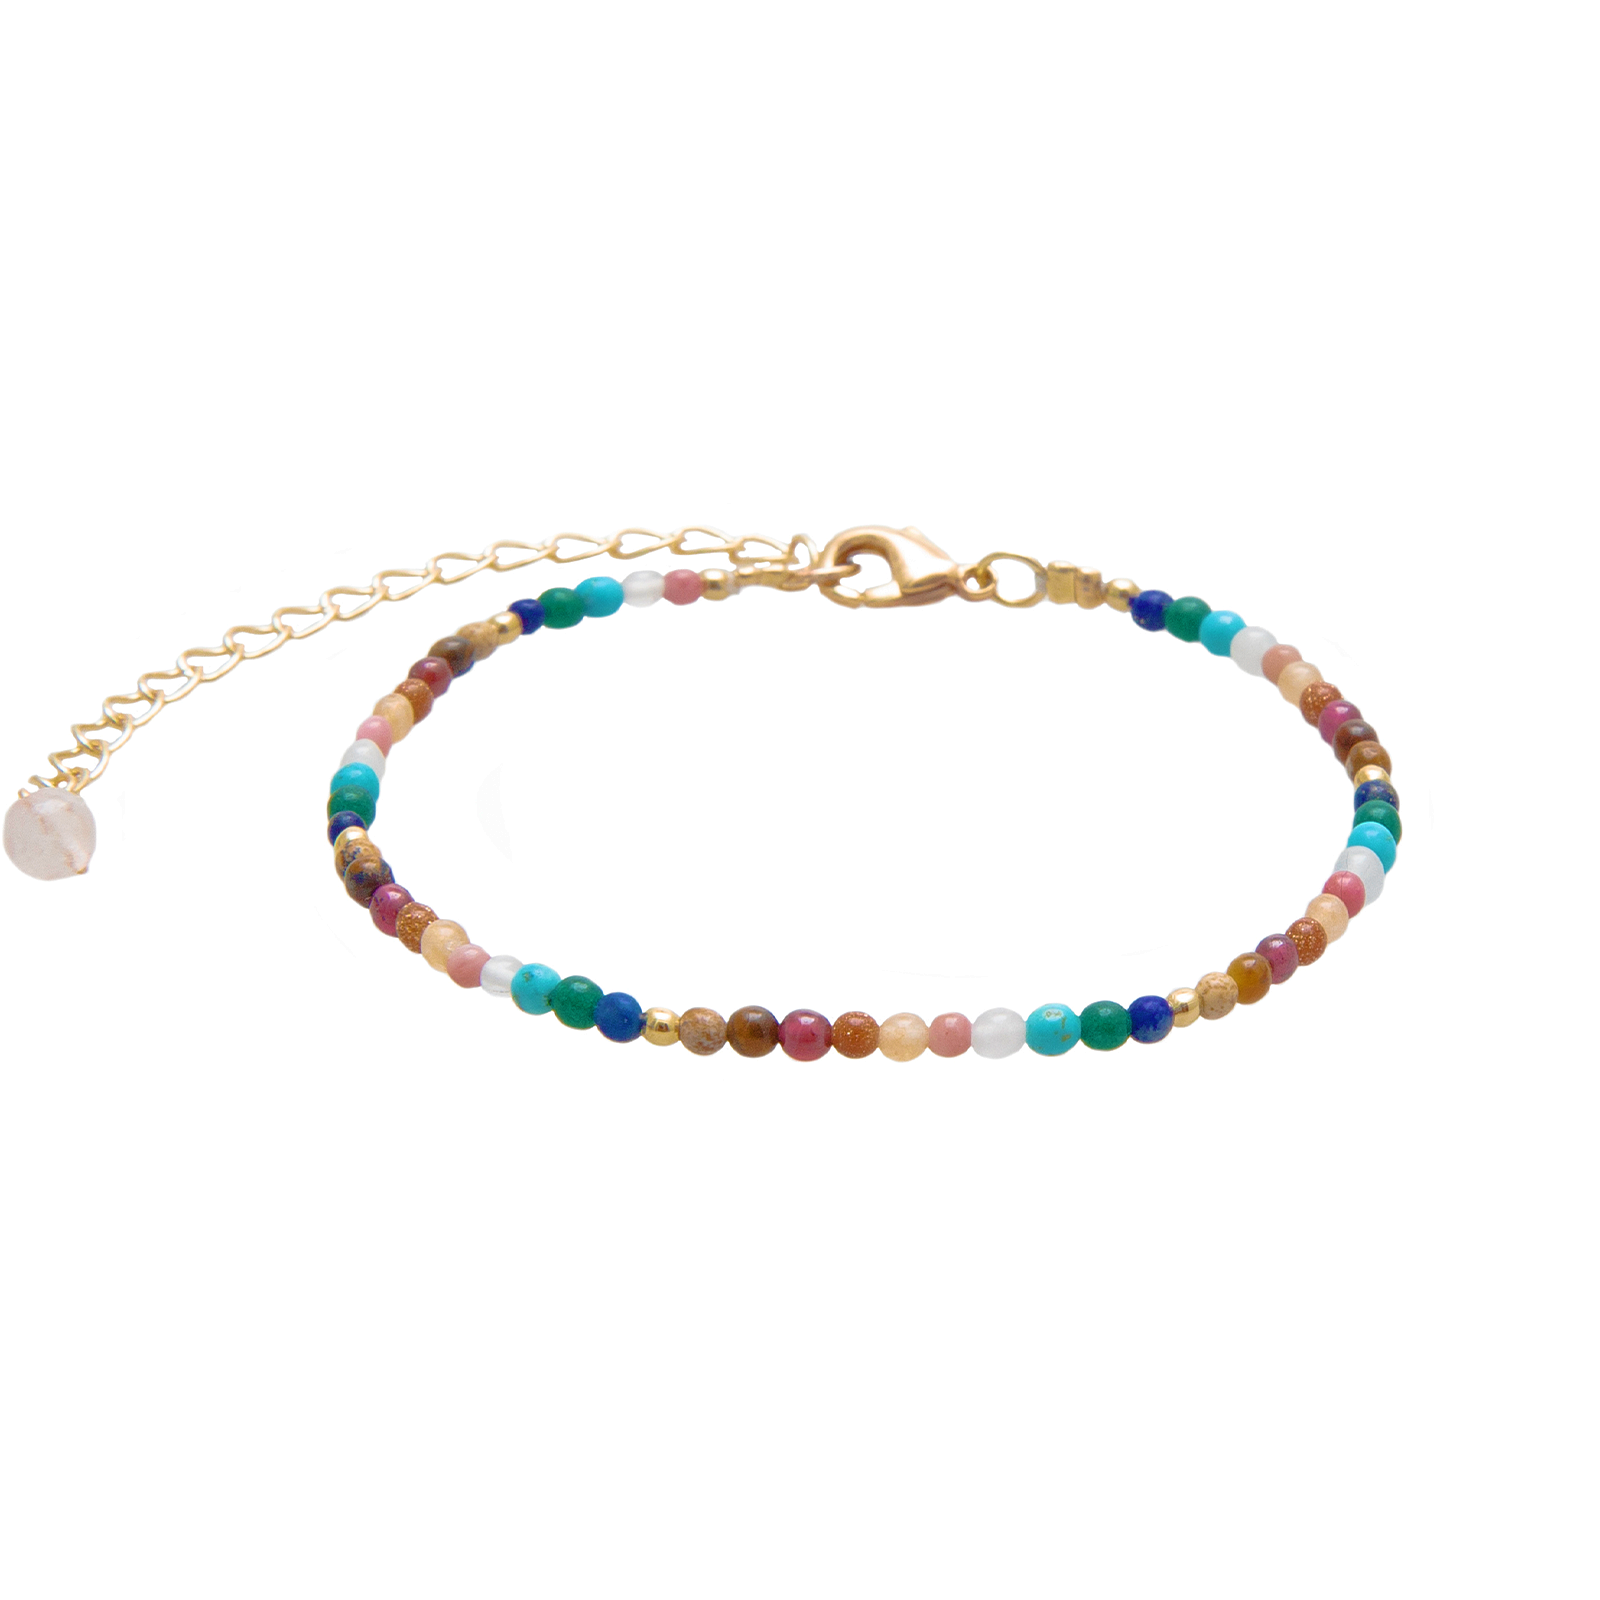 2mm multicolor stone healing bracelet with a gold chain